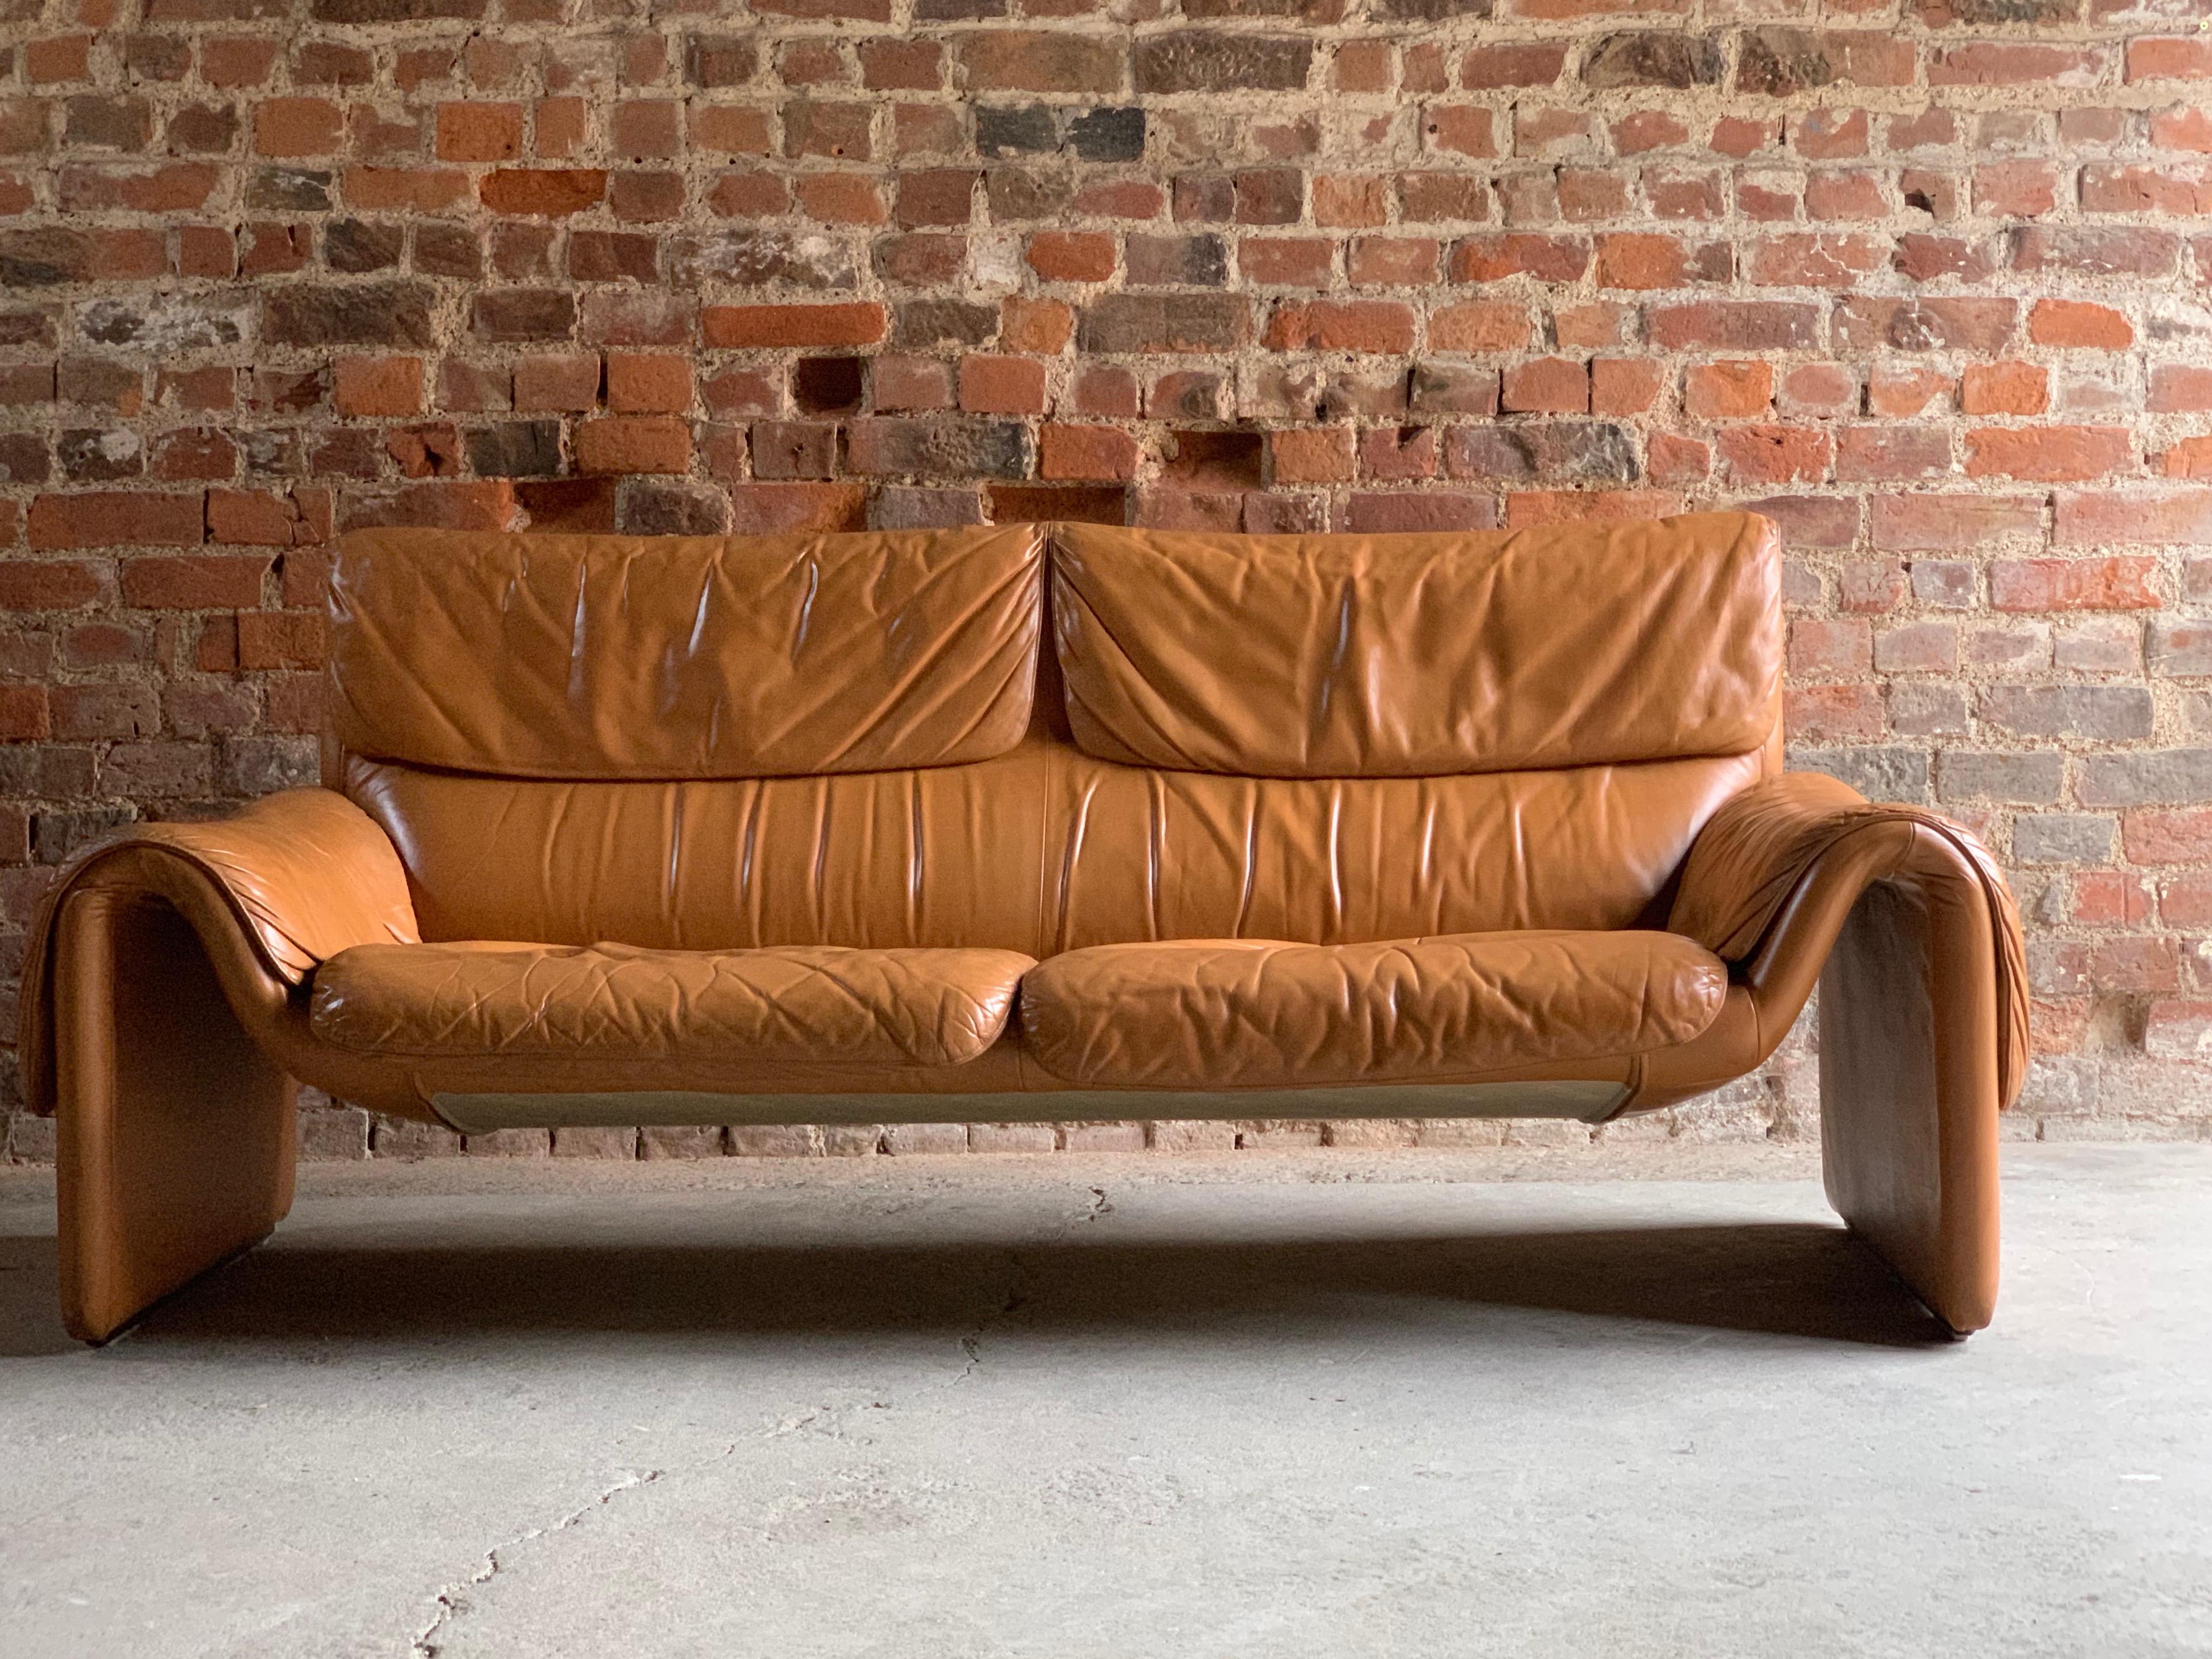 De Sede, Switzerland Cognac leather sofa design no DS2011, circa 1980 

De Sede Switzerland Cognac leather two-seat sofa model DS-2011 circa 1980, This fabulous one owner sofa has a wonderful aged look giving it real character and style, its